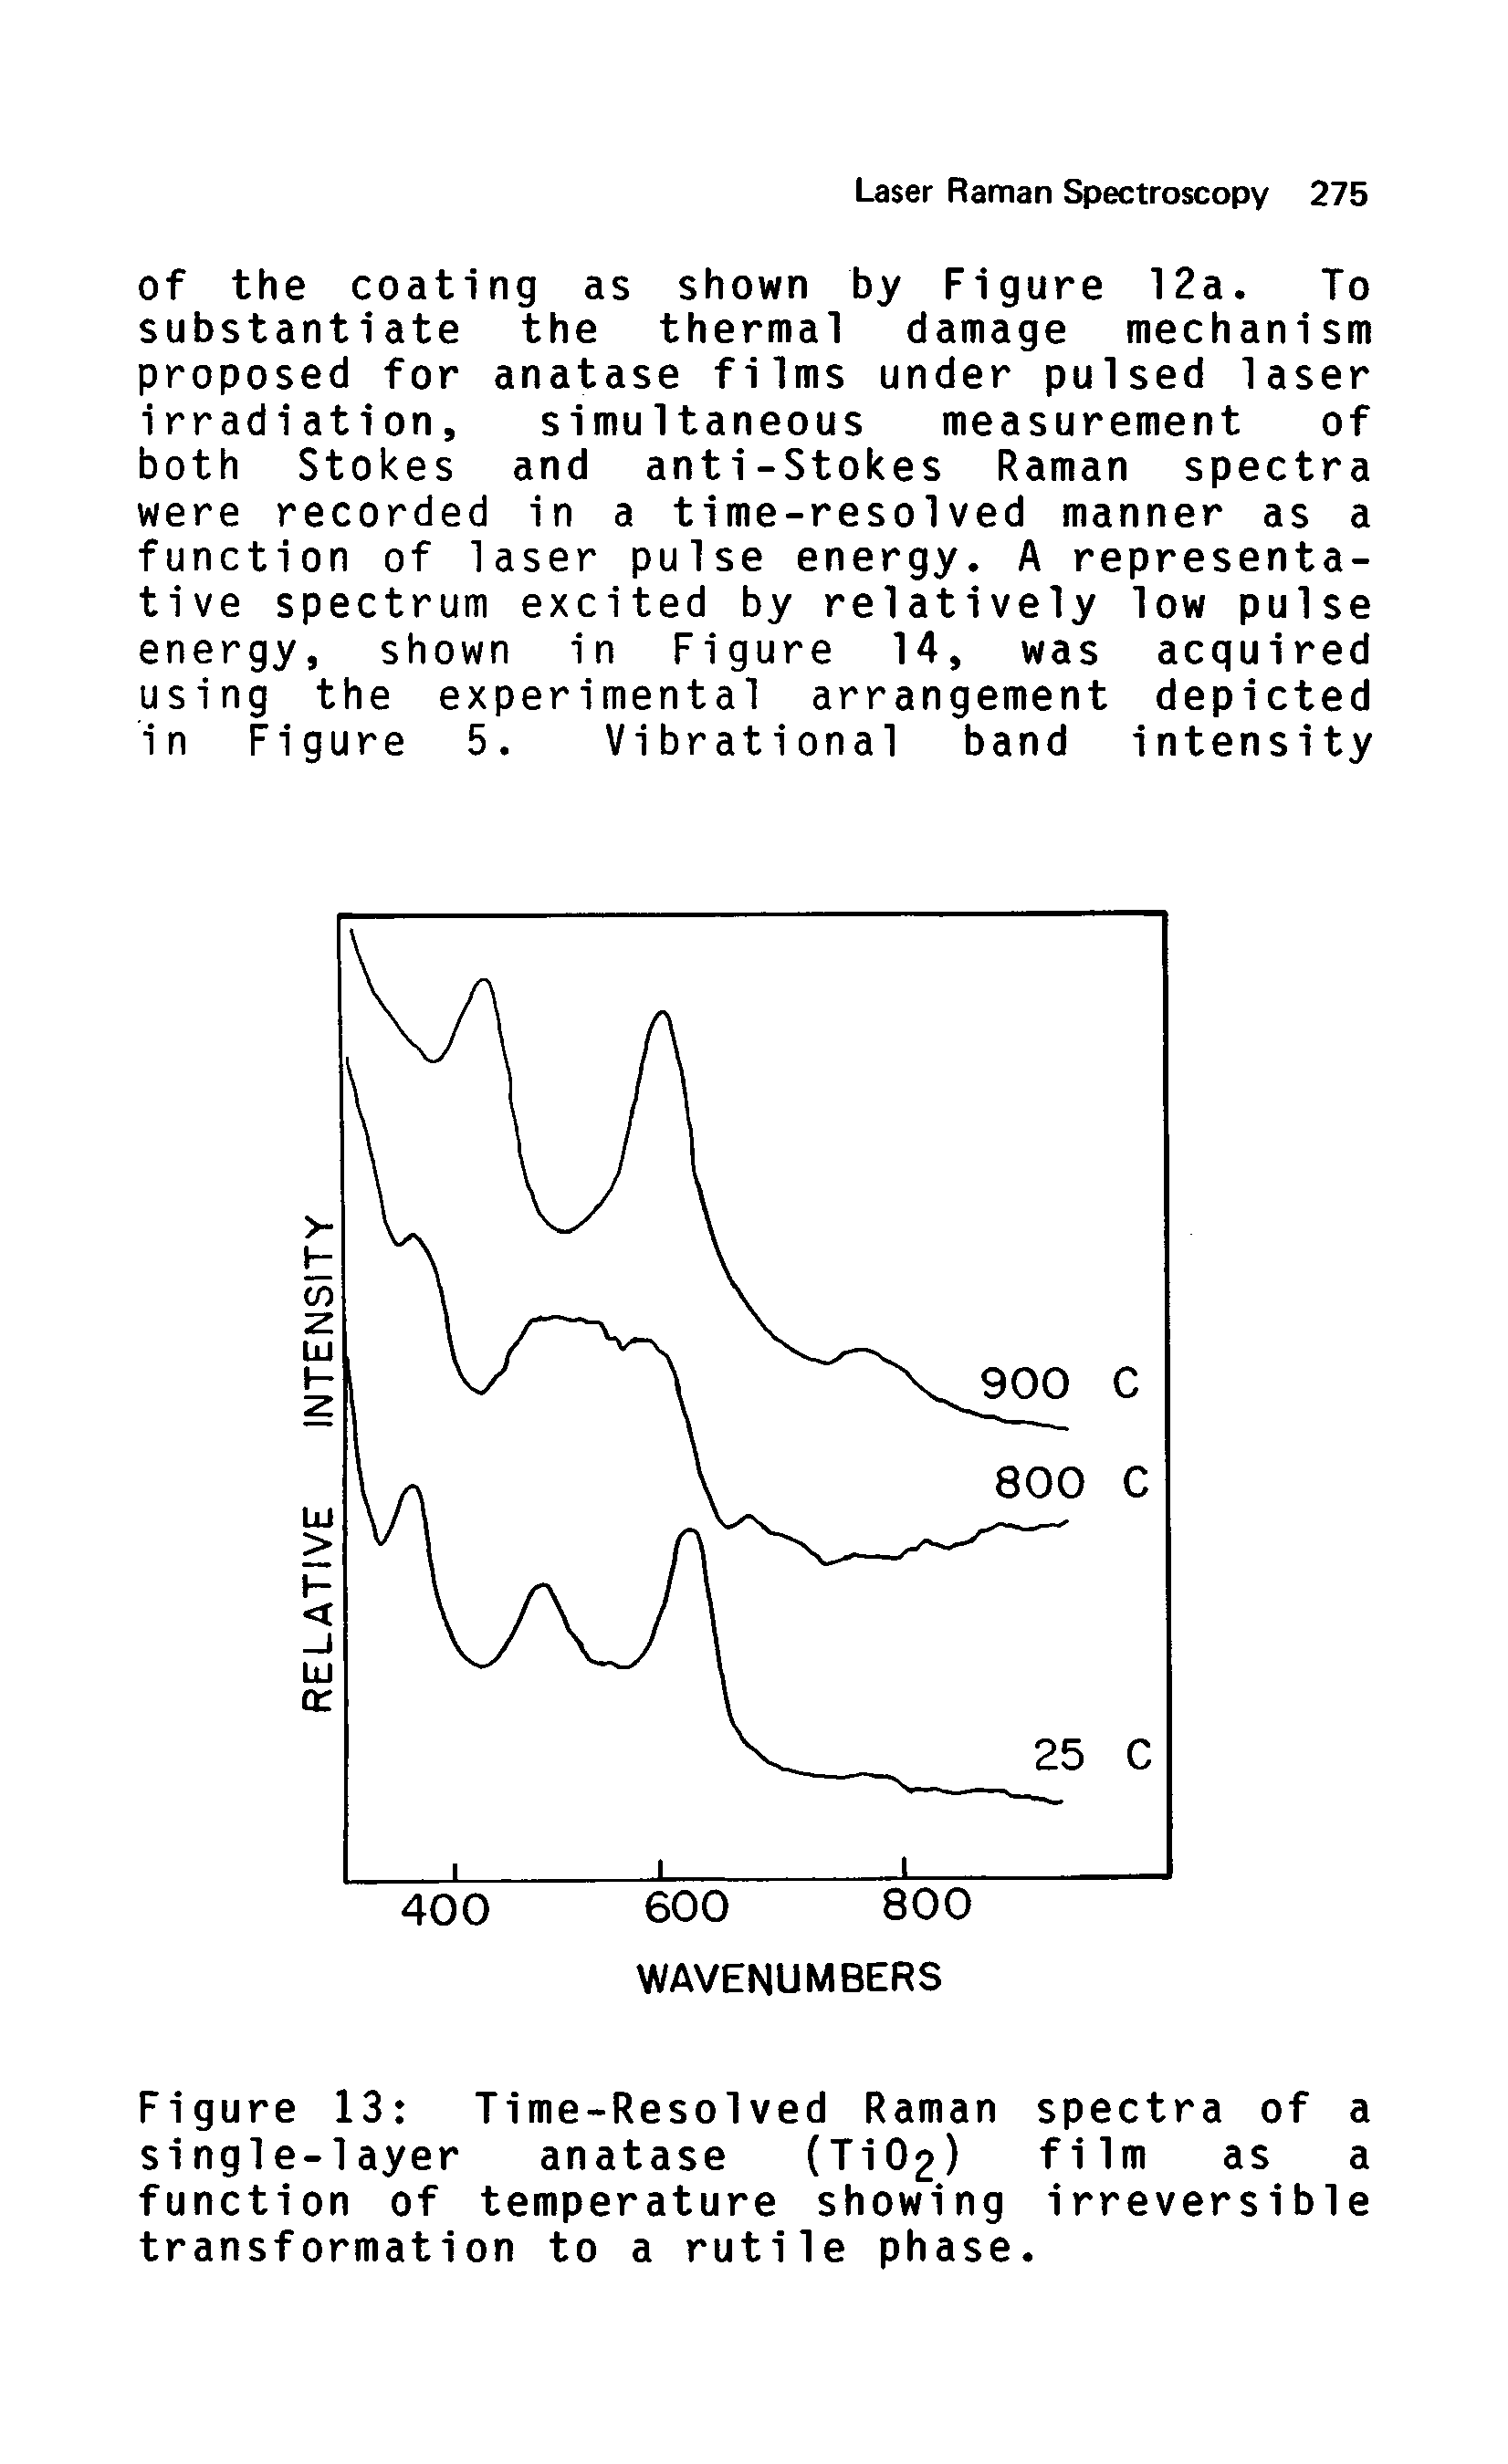 Figure 13 Time-Resolved Raman spectra of a single-layer anatase (Ti02) film as a function of temperature showing irreversible transformation to a rutile phase.